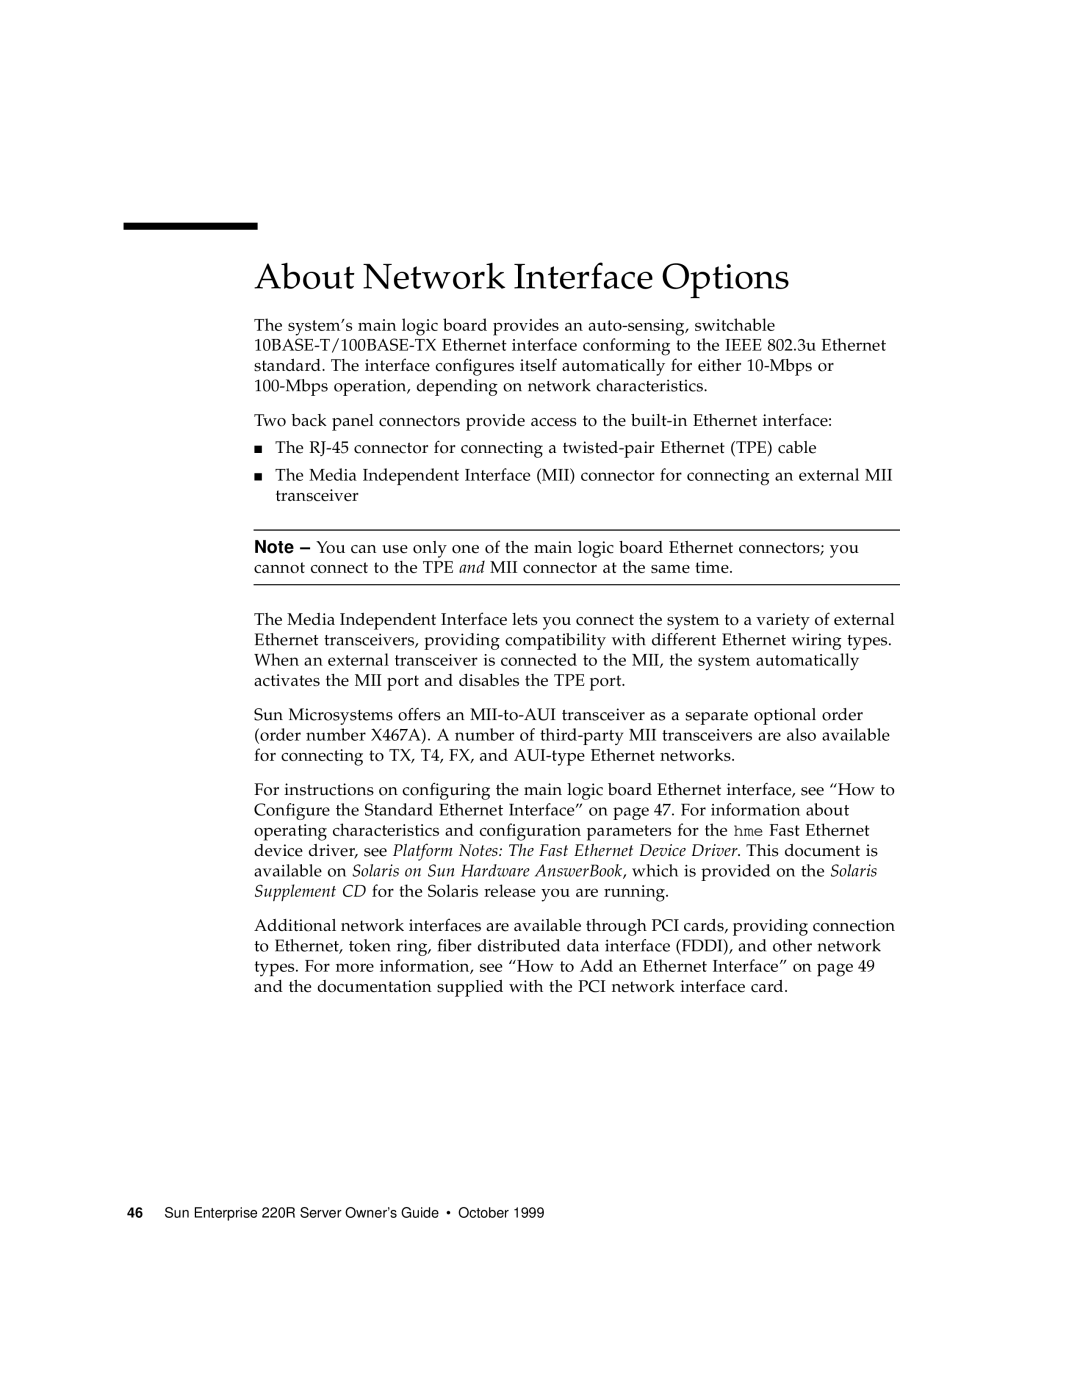 Sun Microsystems 220R manual About Network Interface Options 